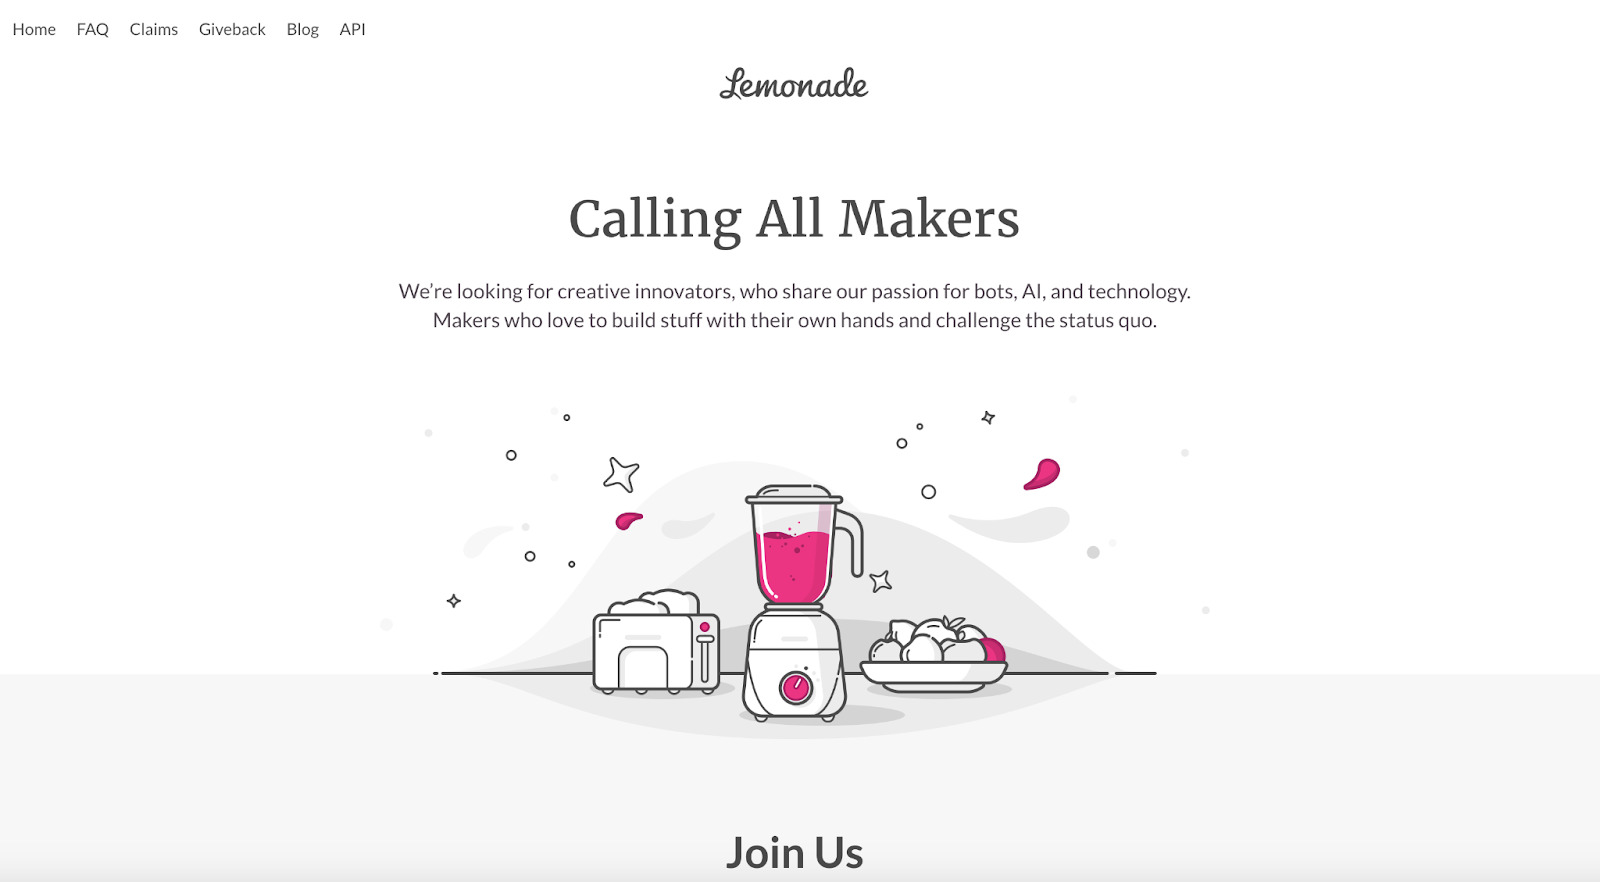 Lemonade recruits new team members on its valuable About Us page.